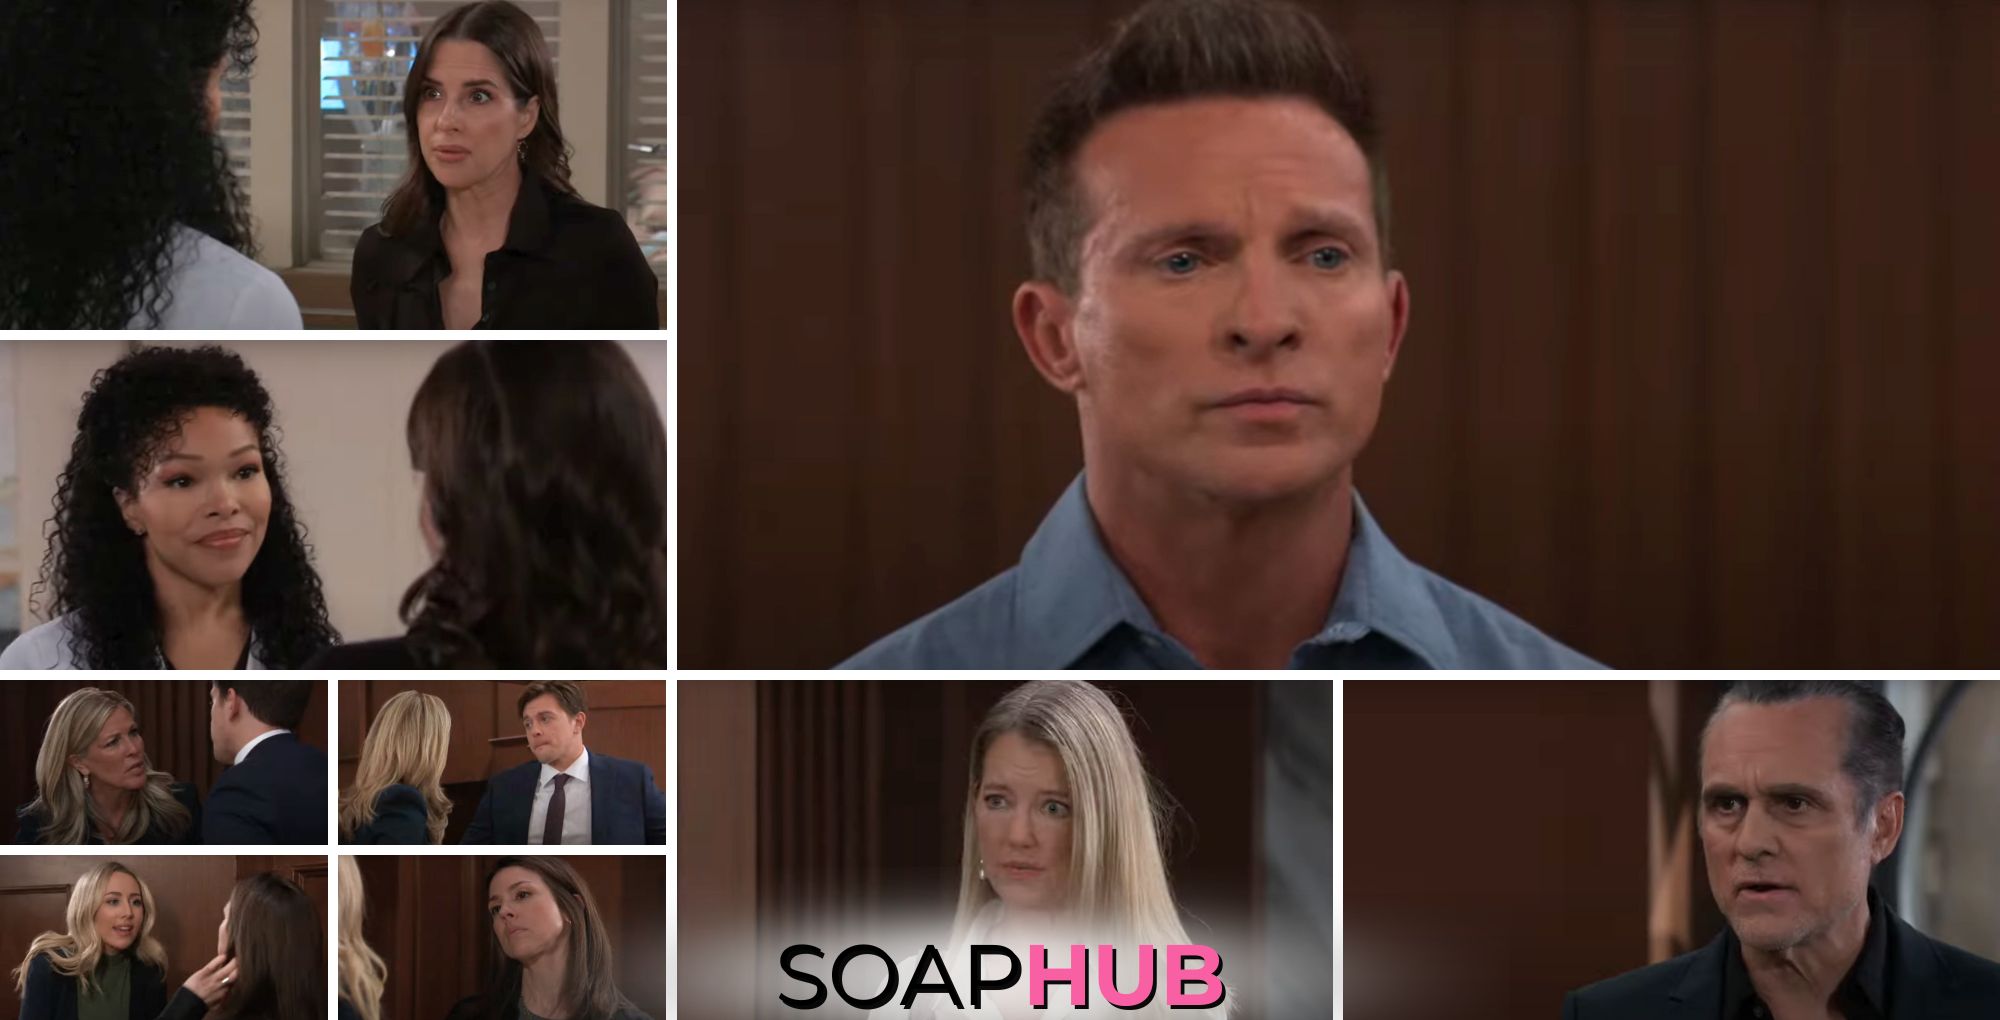 General Hospital preview collage for Tuesday, March 28, 2024, episode, with the Soap Hub logo across the bottom.